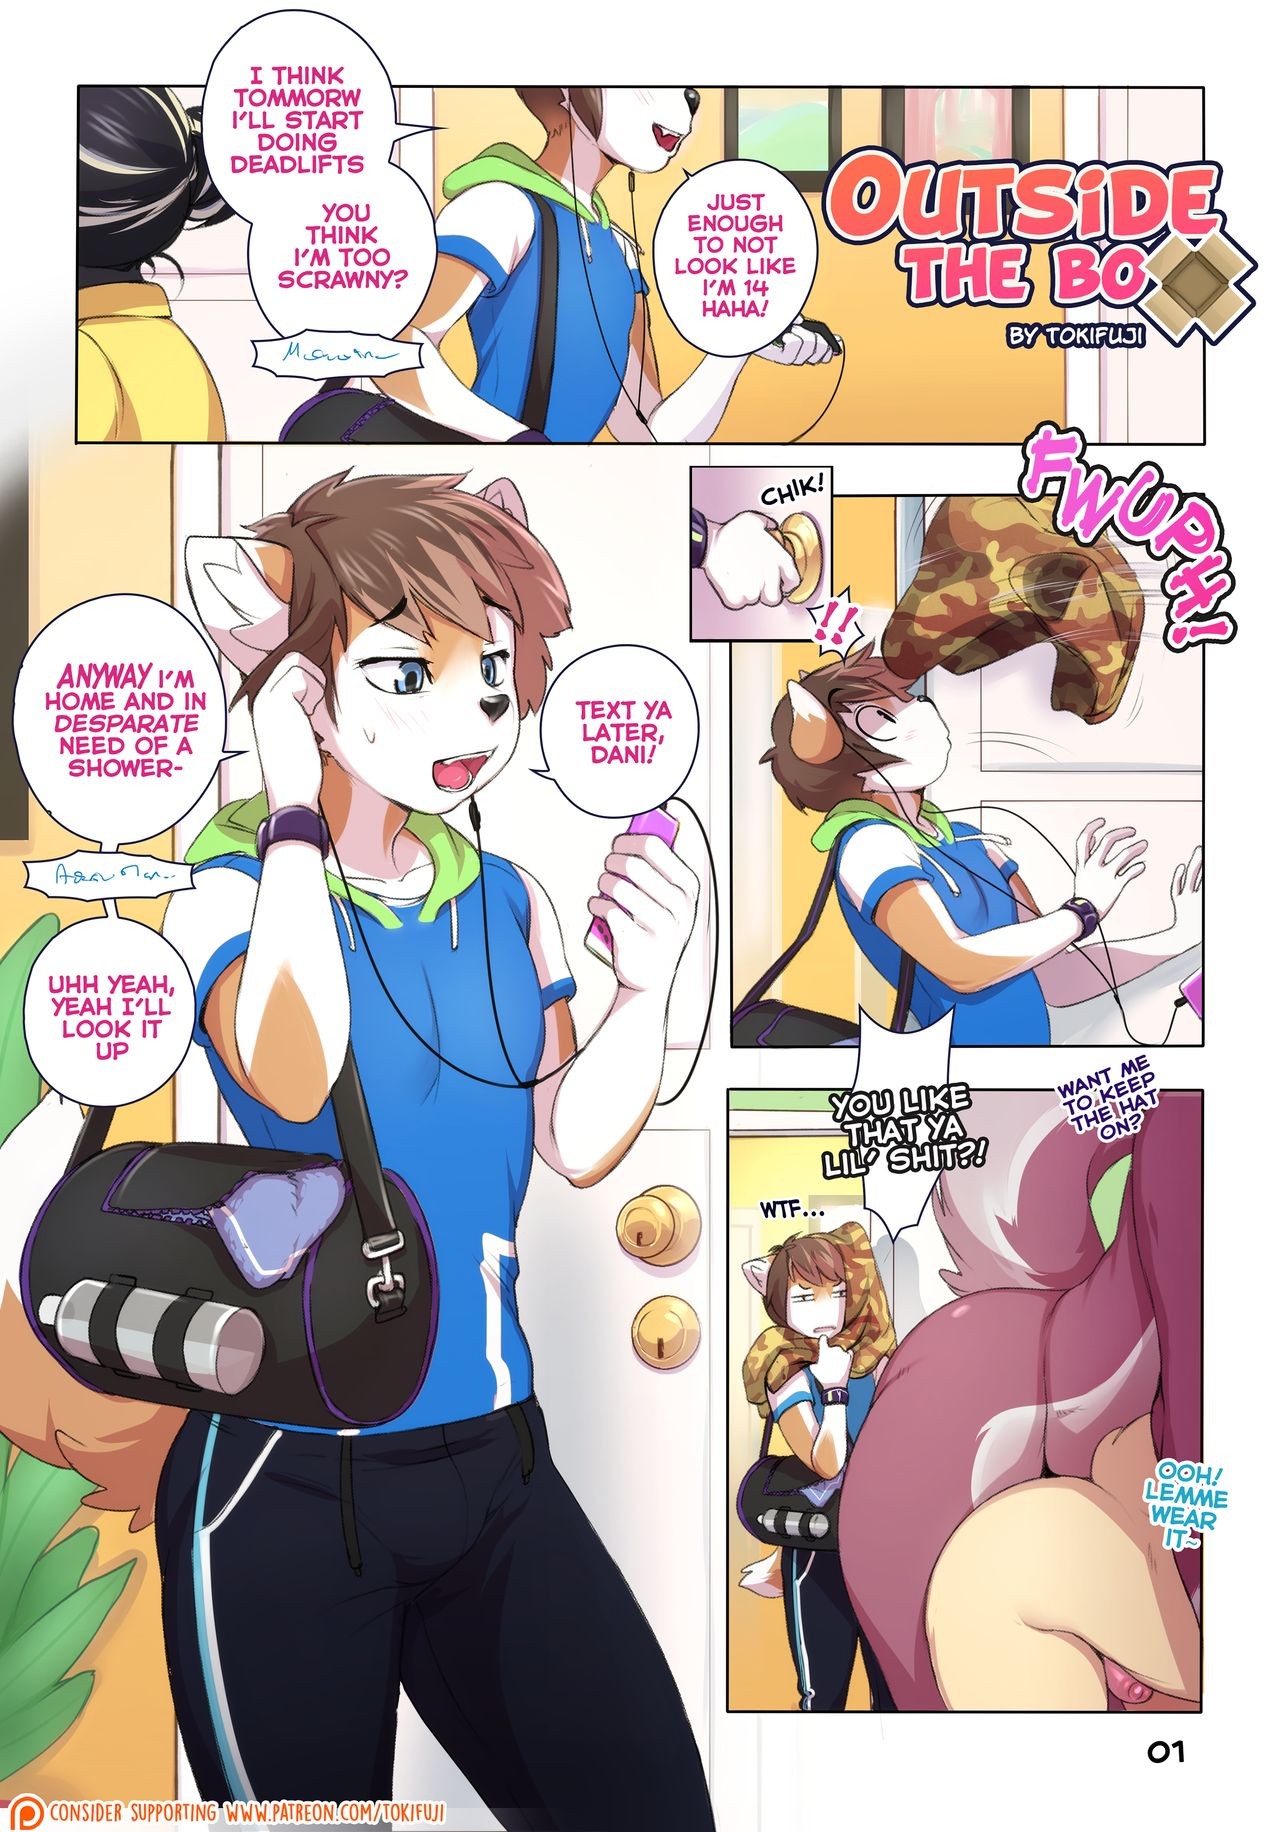 Gay furry porn.comic outside the box chapter 2